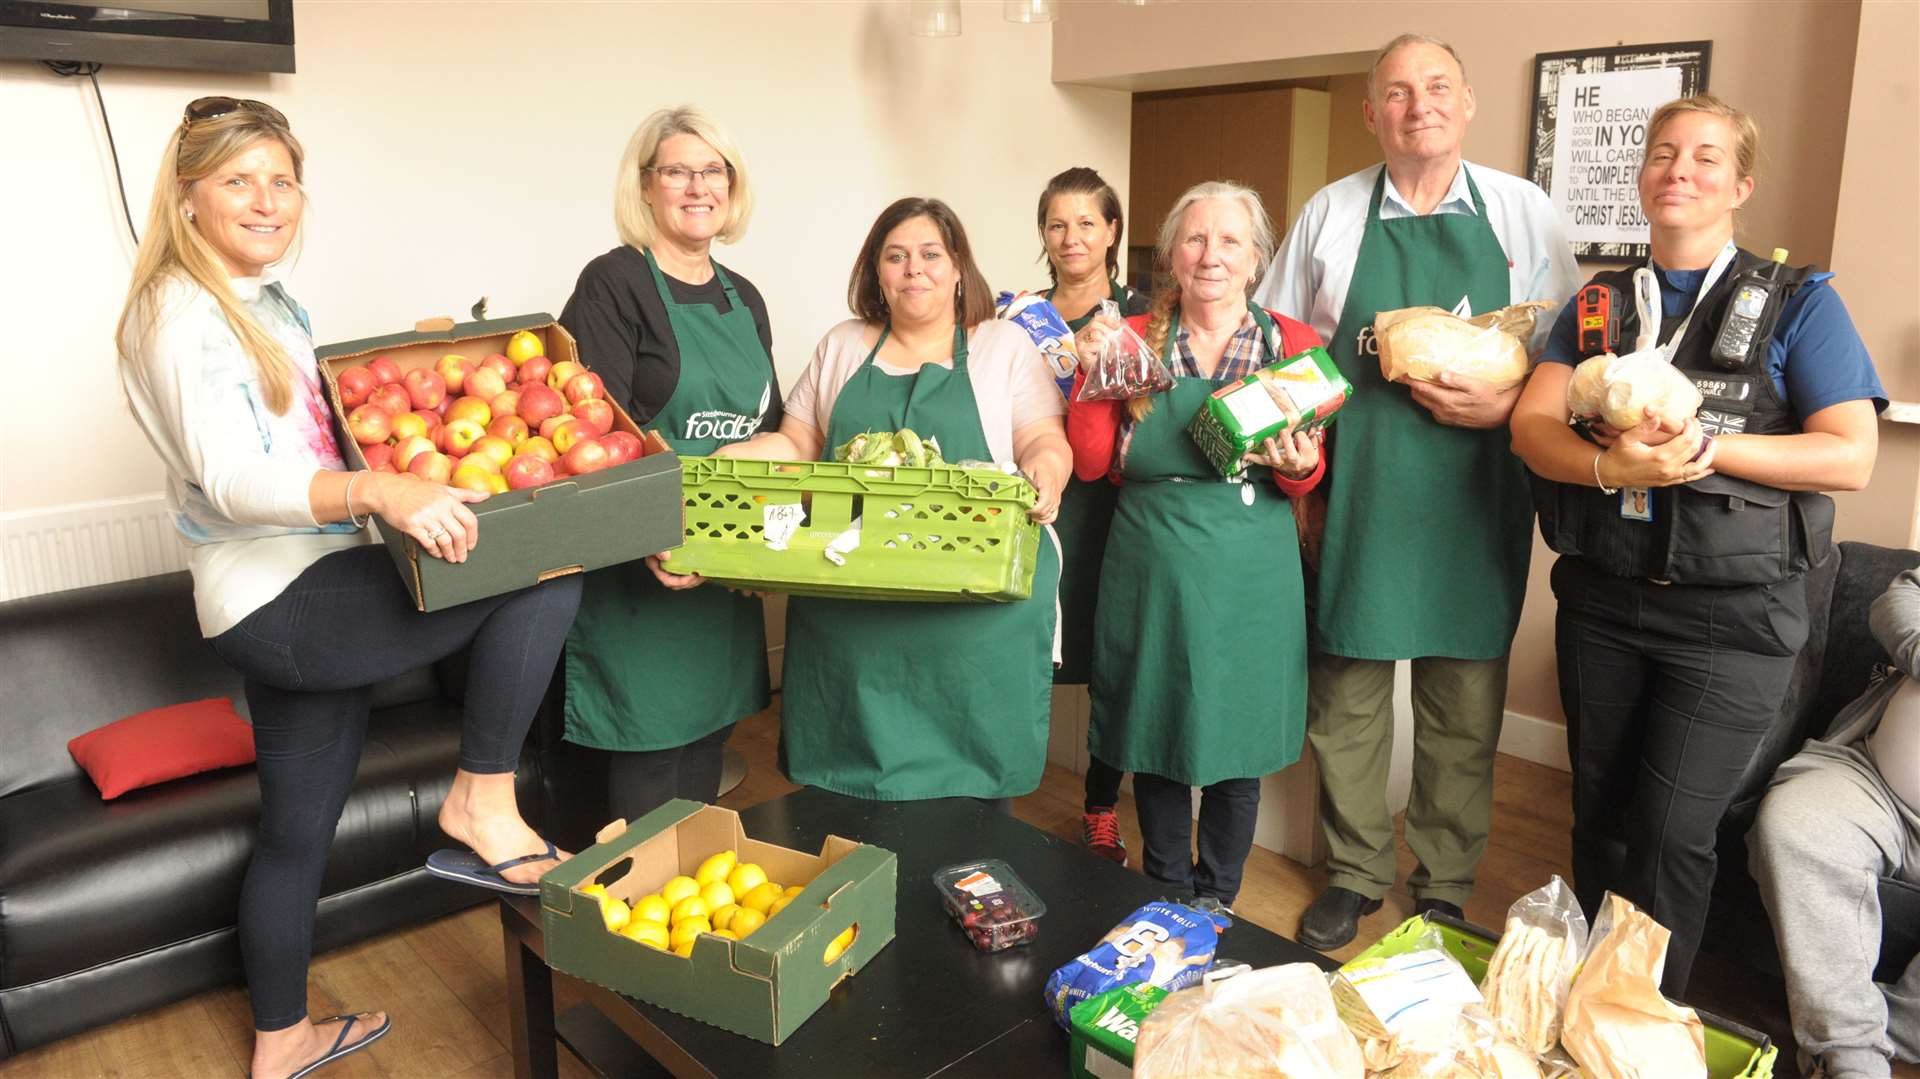 There is always a need for volunteers at food banks.